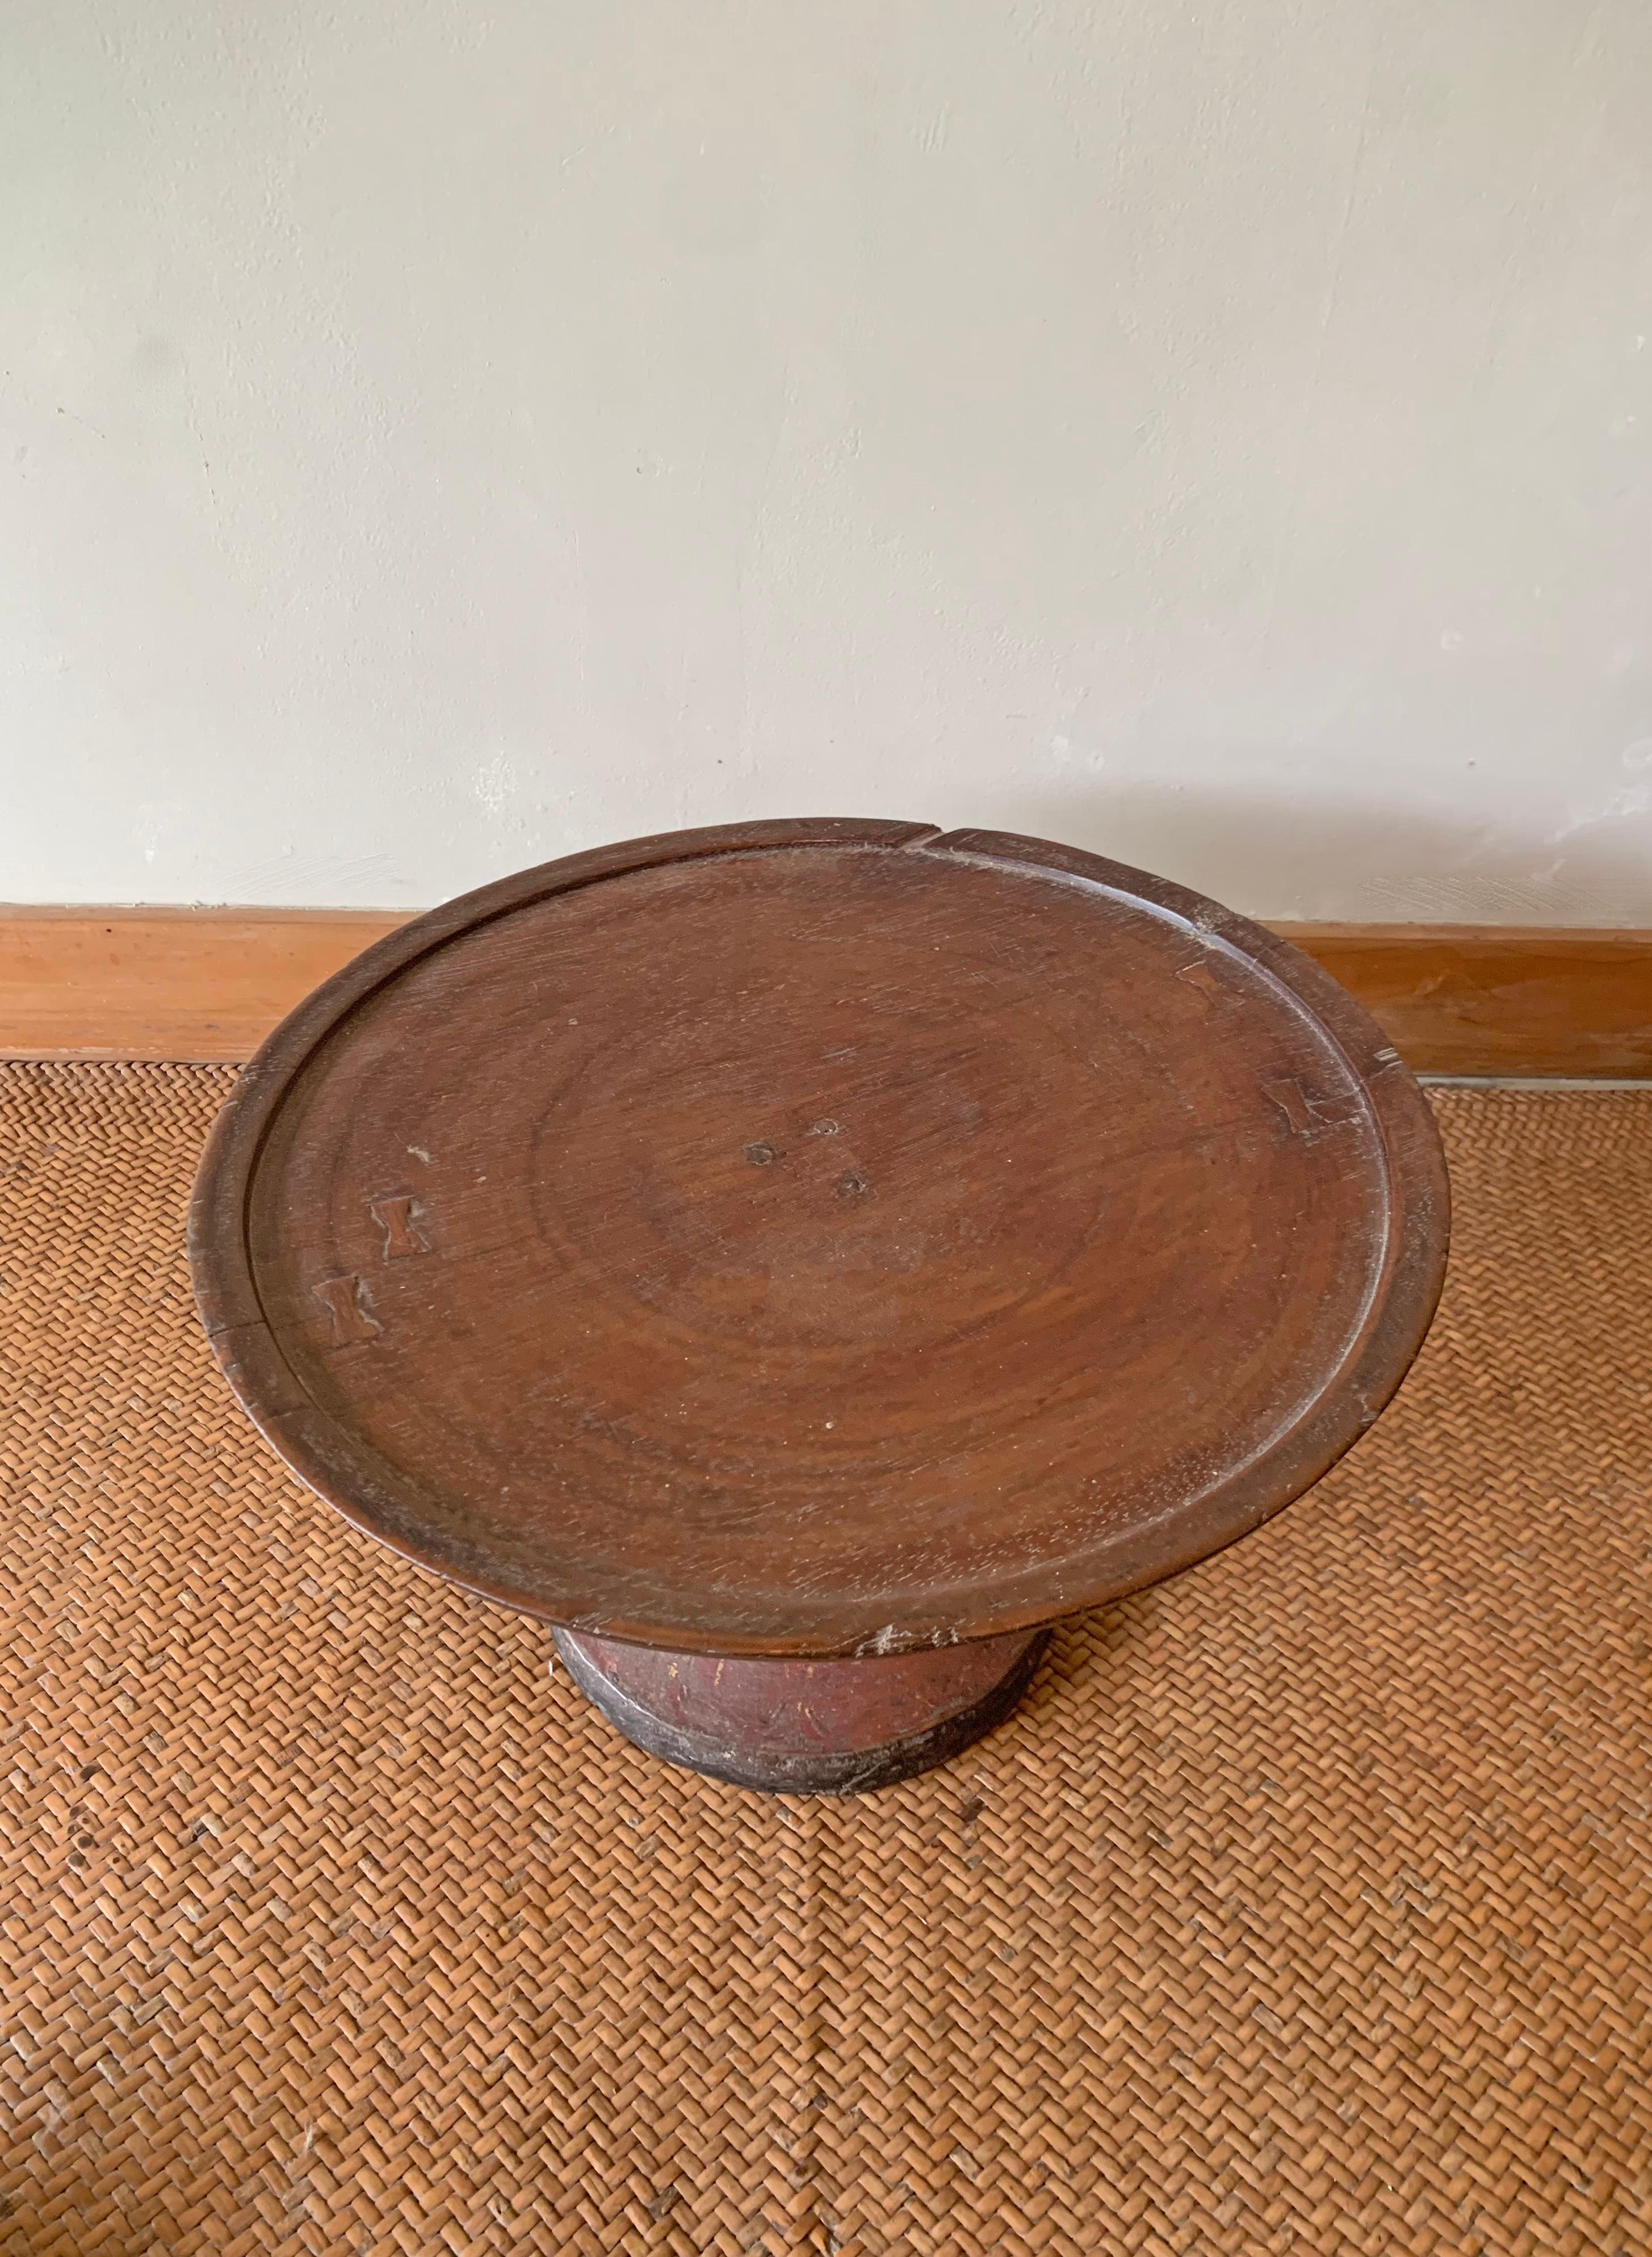 Balinese offering tray; these trays known as 